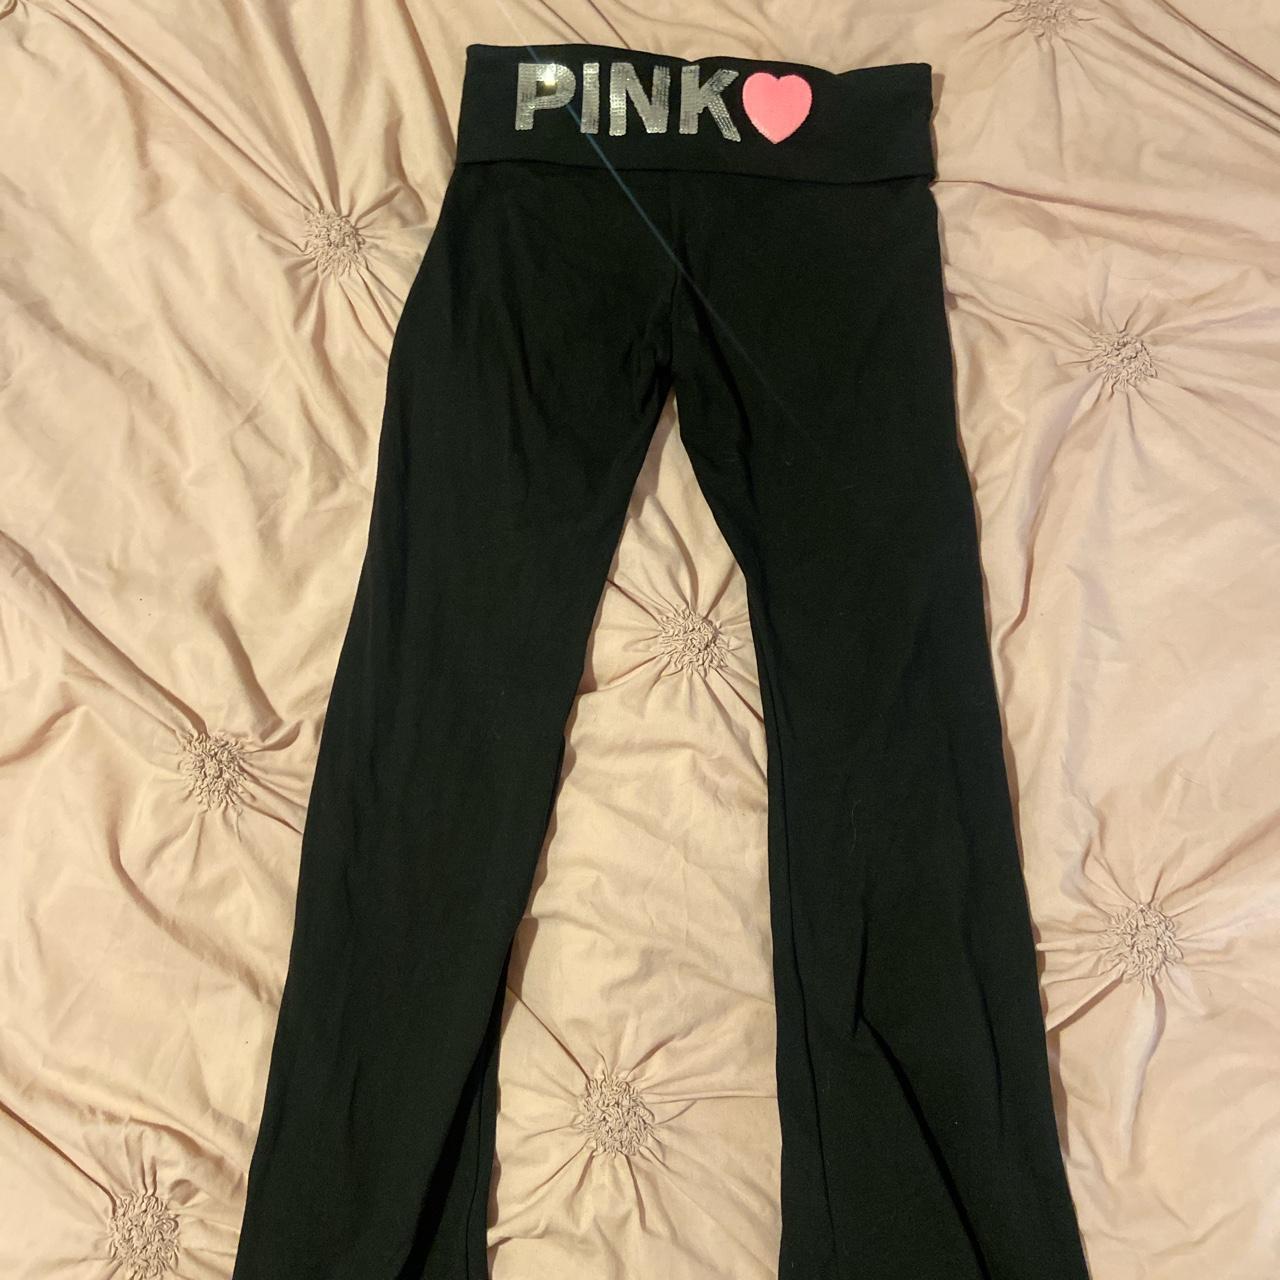 Victoria's Secret Pink Bling Yoga Pants size Small